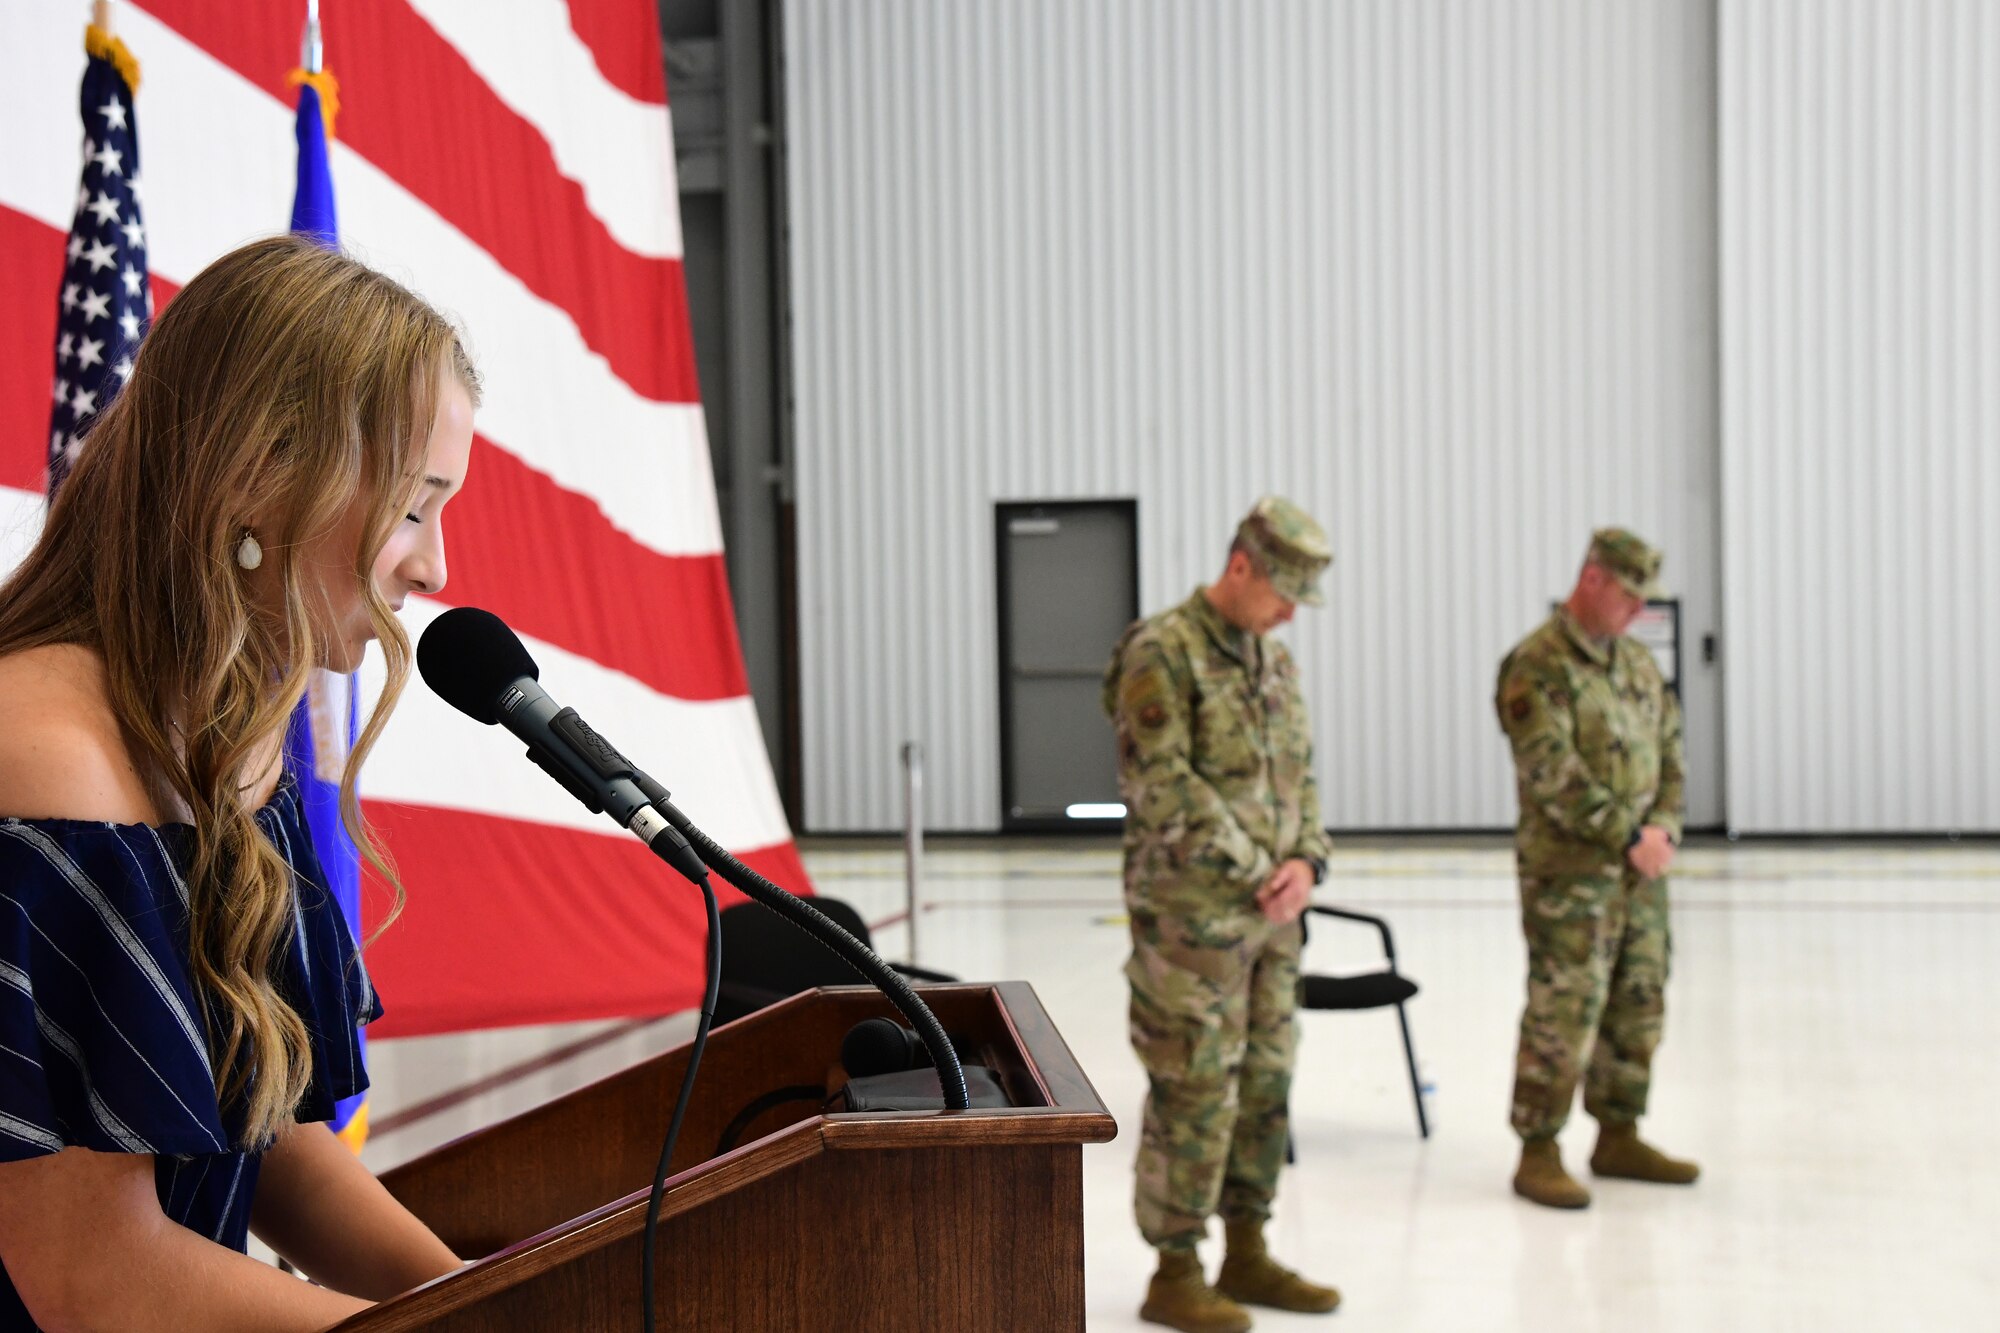 Emma Kirk gives the invocation for her father, Lt. Col. Michael Kirk, 926th Security Forces Squadron, Assumption of Command ceremony, July 24, 2020, Nellis Air Force Base, Nevada. The Assumption of Command ceremony was modified to honor heritage while maintaining current social distancing guidelines. (U.S. Air Force photo by Natalie Stanley)